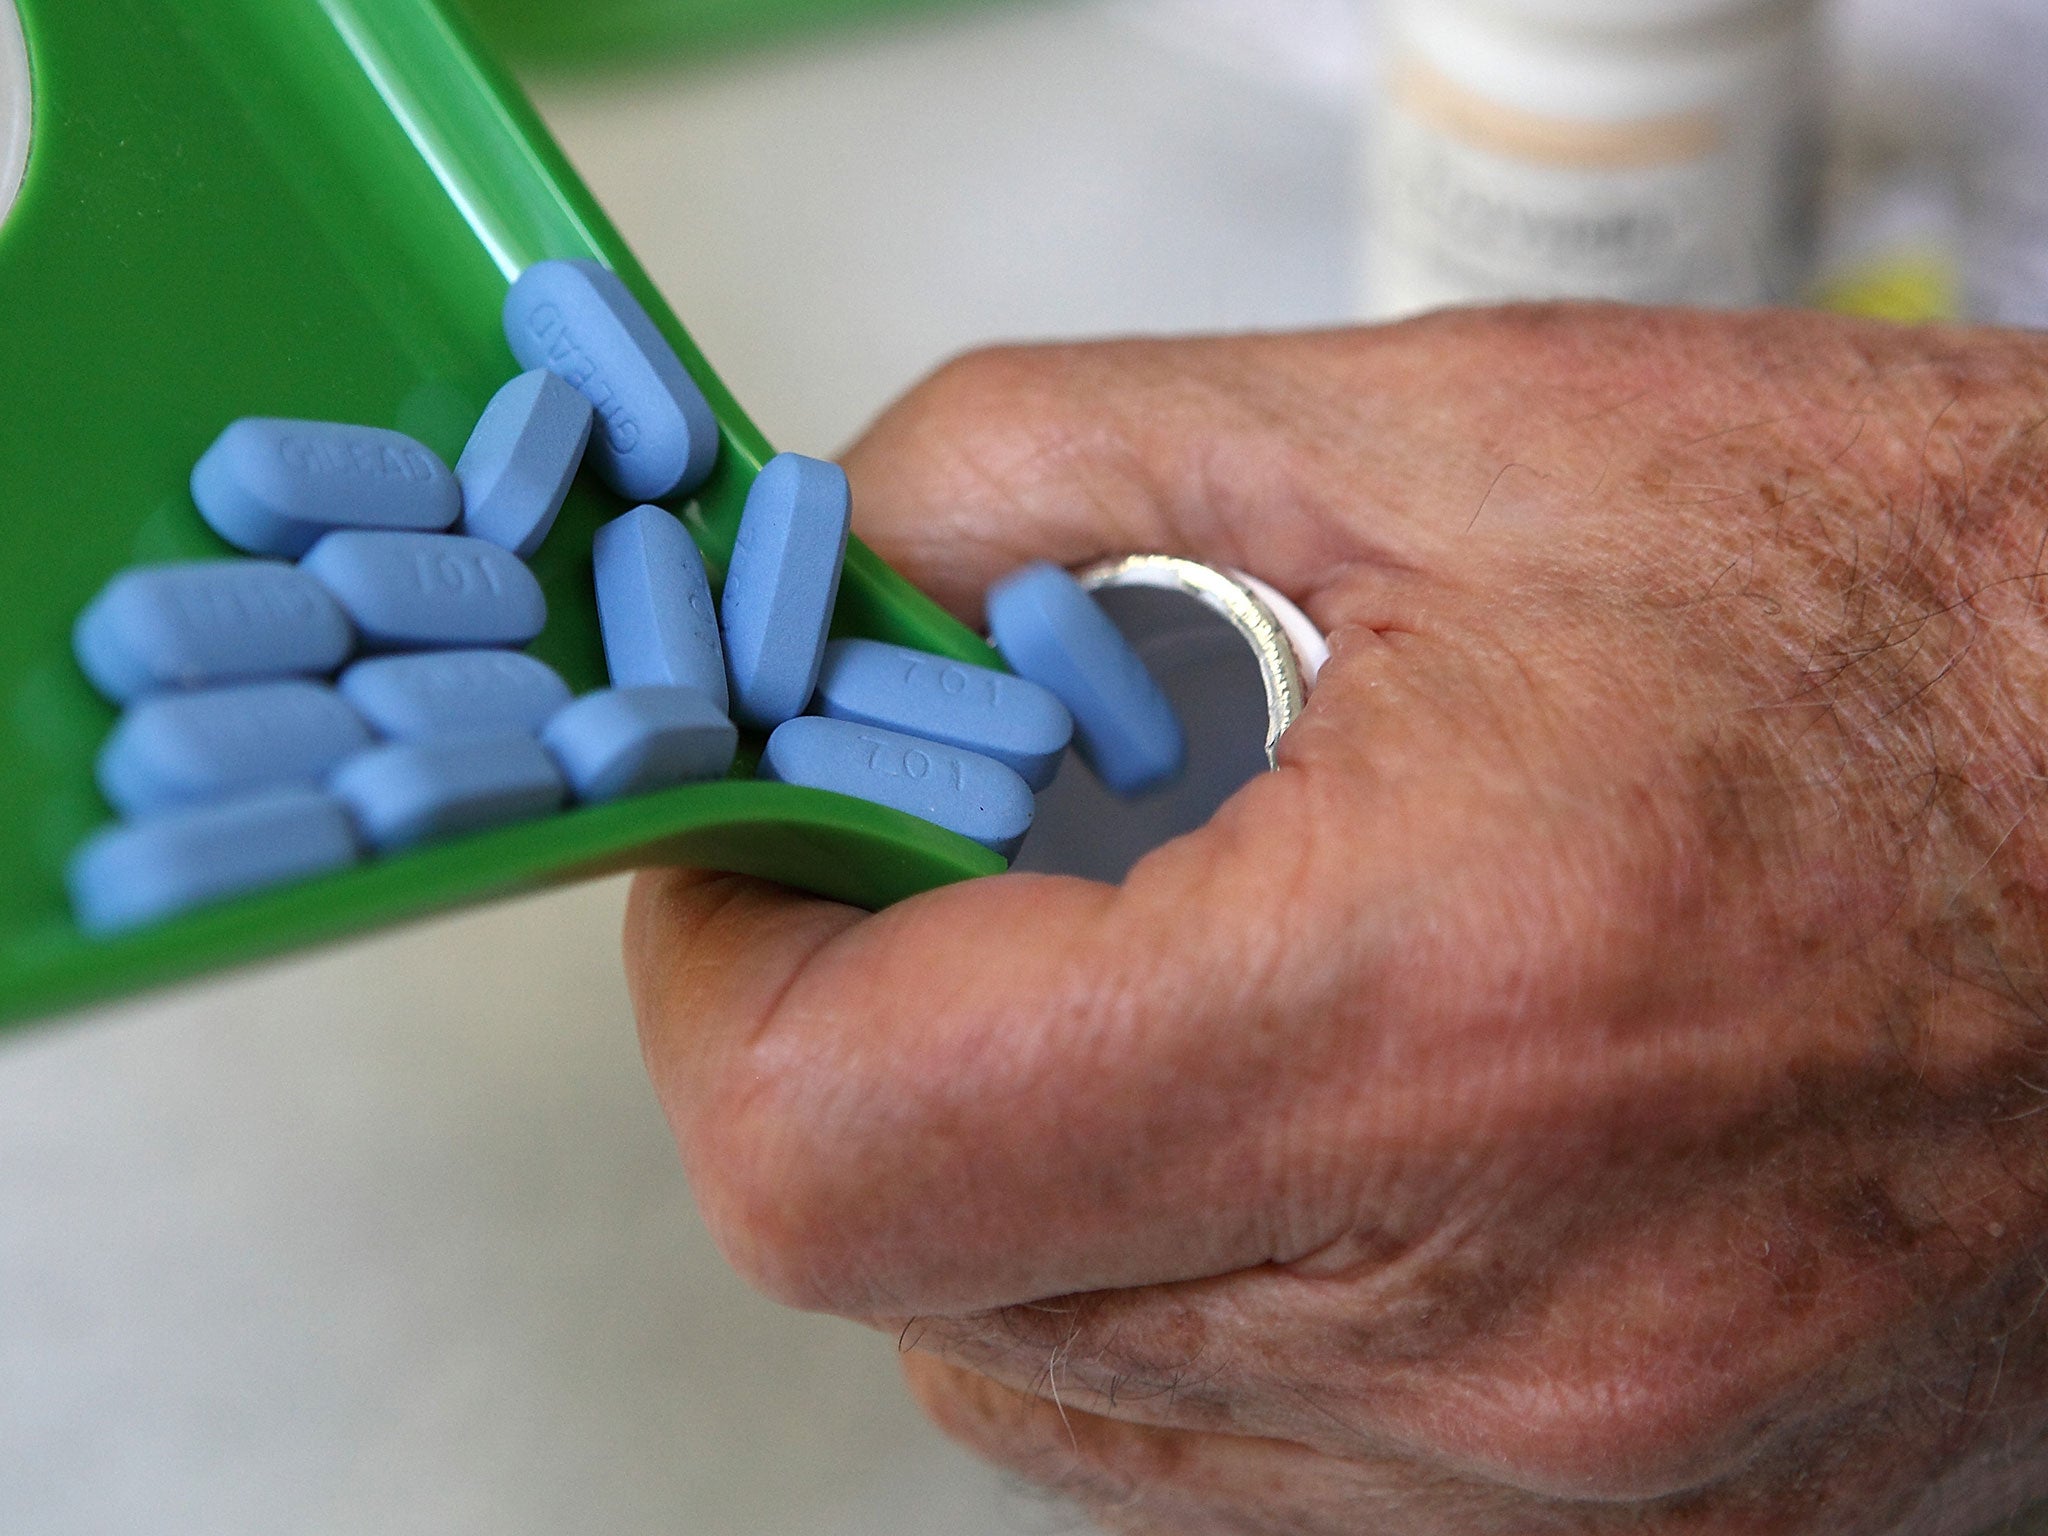 It is believed that antiretroviral drug use could stop 1m new infections in the next decade